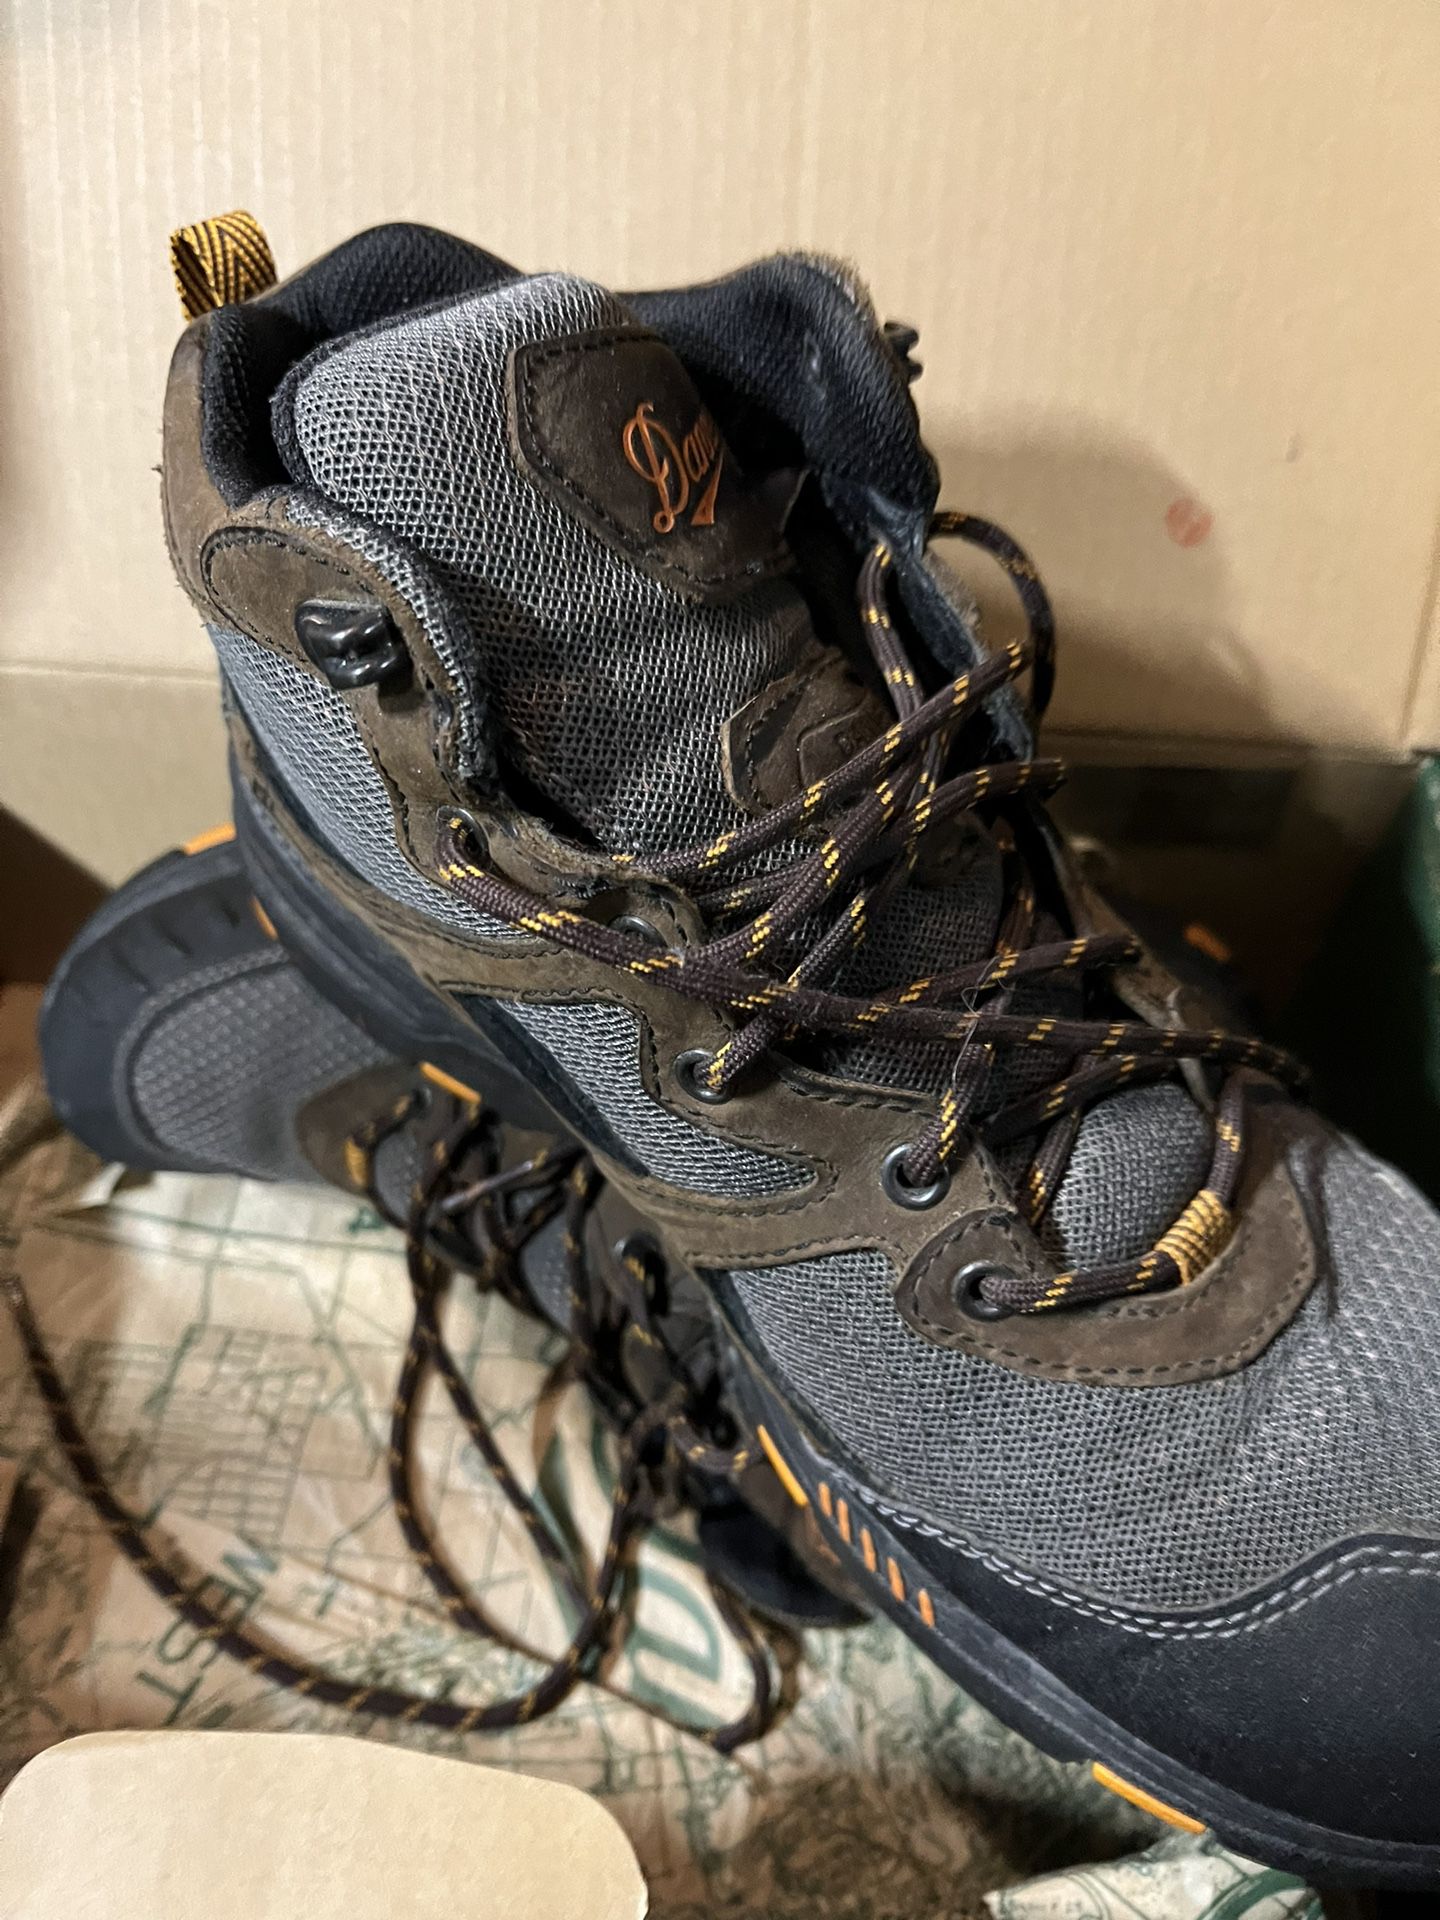 Danner Hiking/Work Boots - 12240 Springfield